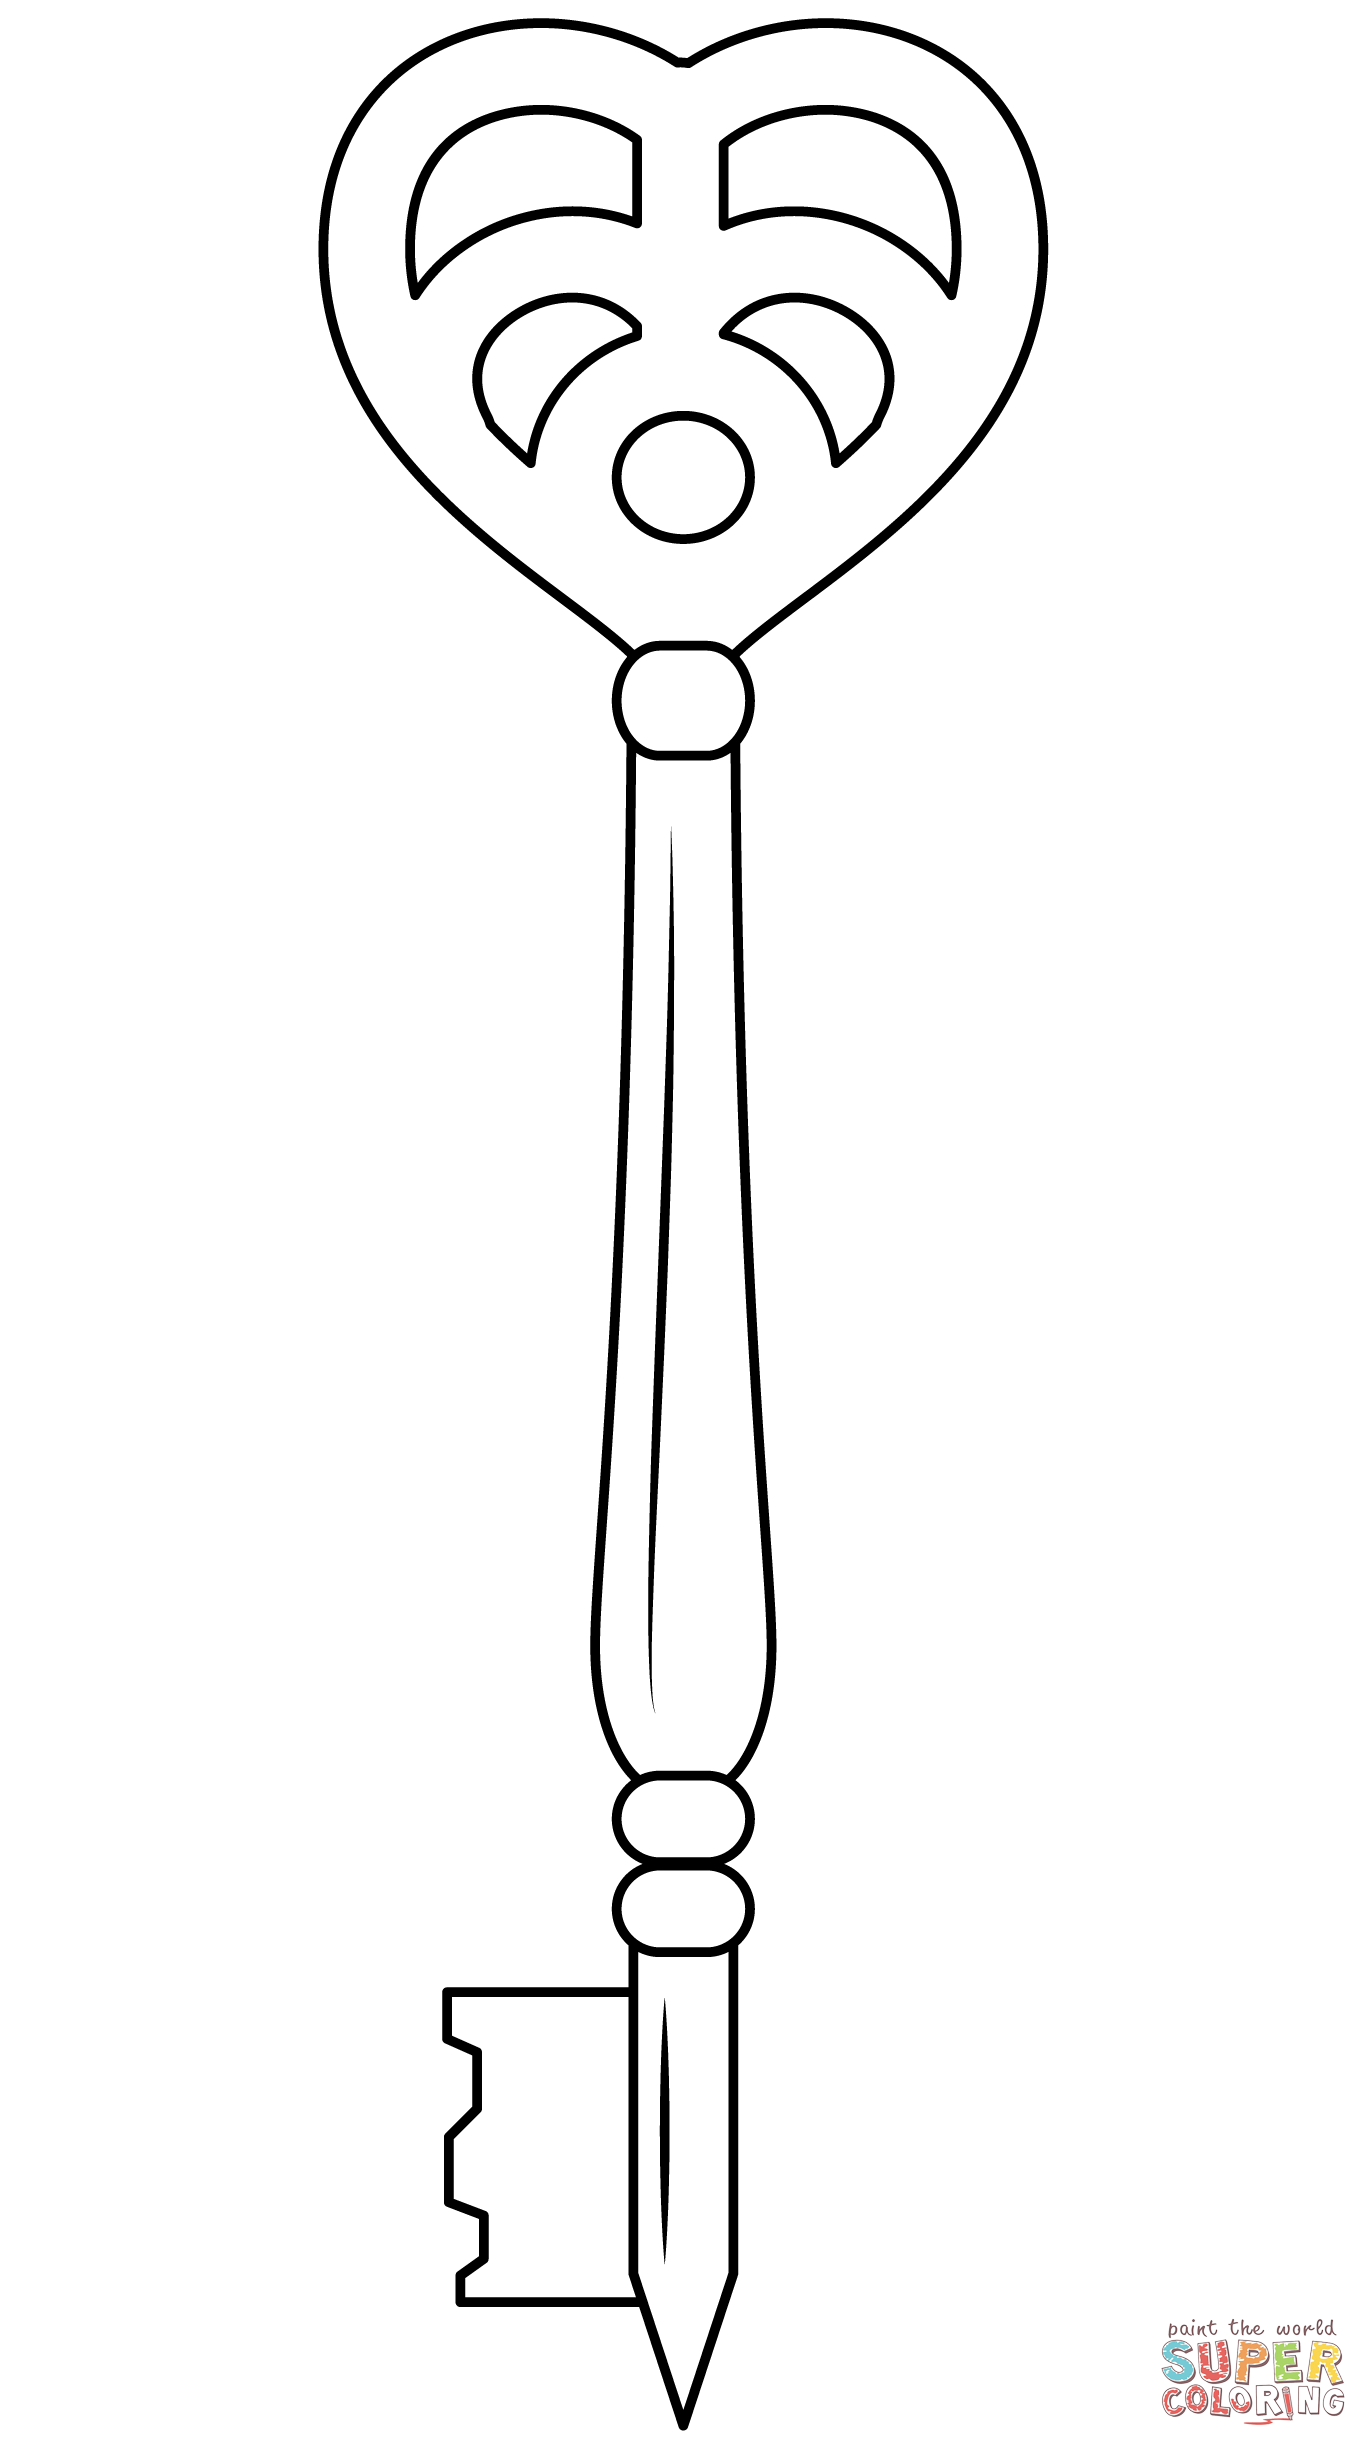 Skeleton key coloring page free printable coloring pages